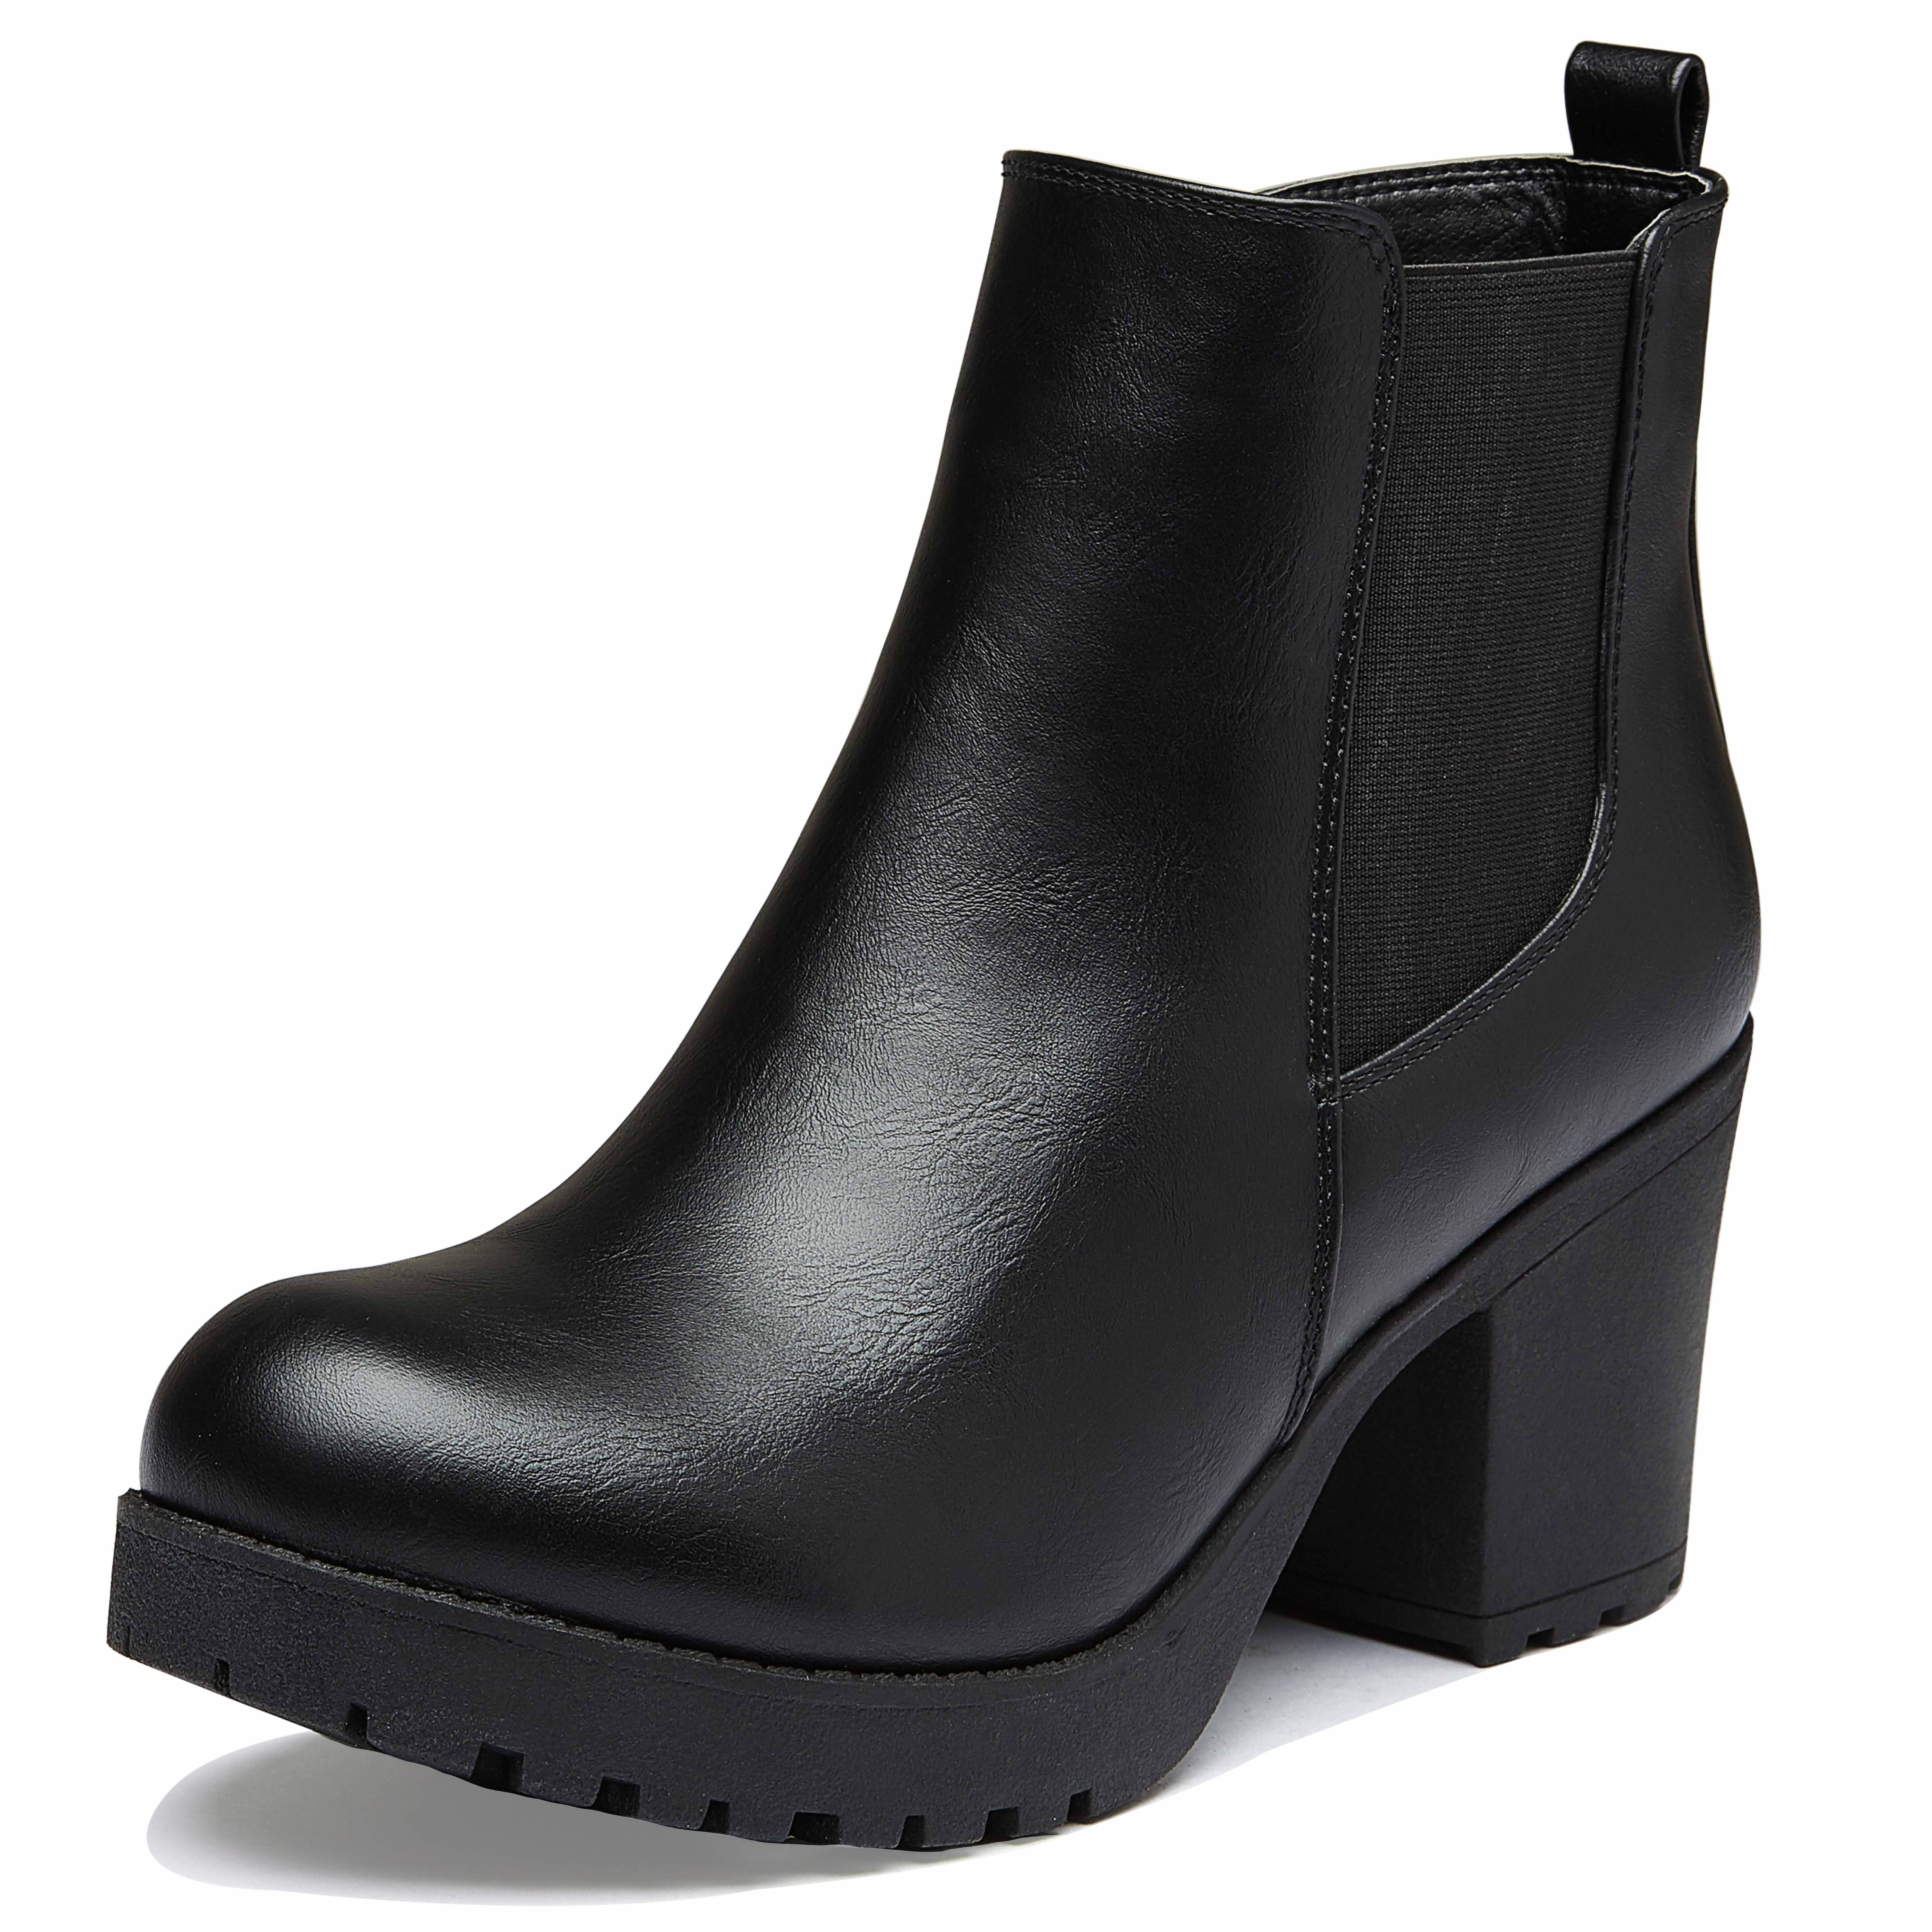 DREAM PAIRS Women’s Black Ankle Booties Square Toe Chunky Blocked Heels Chelsea Boots 